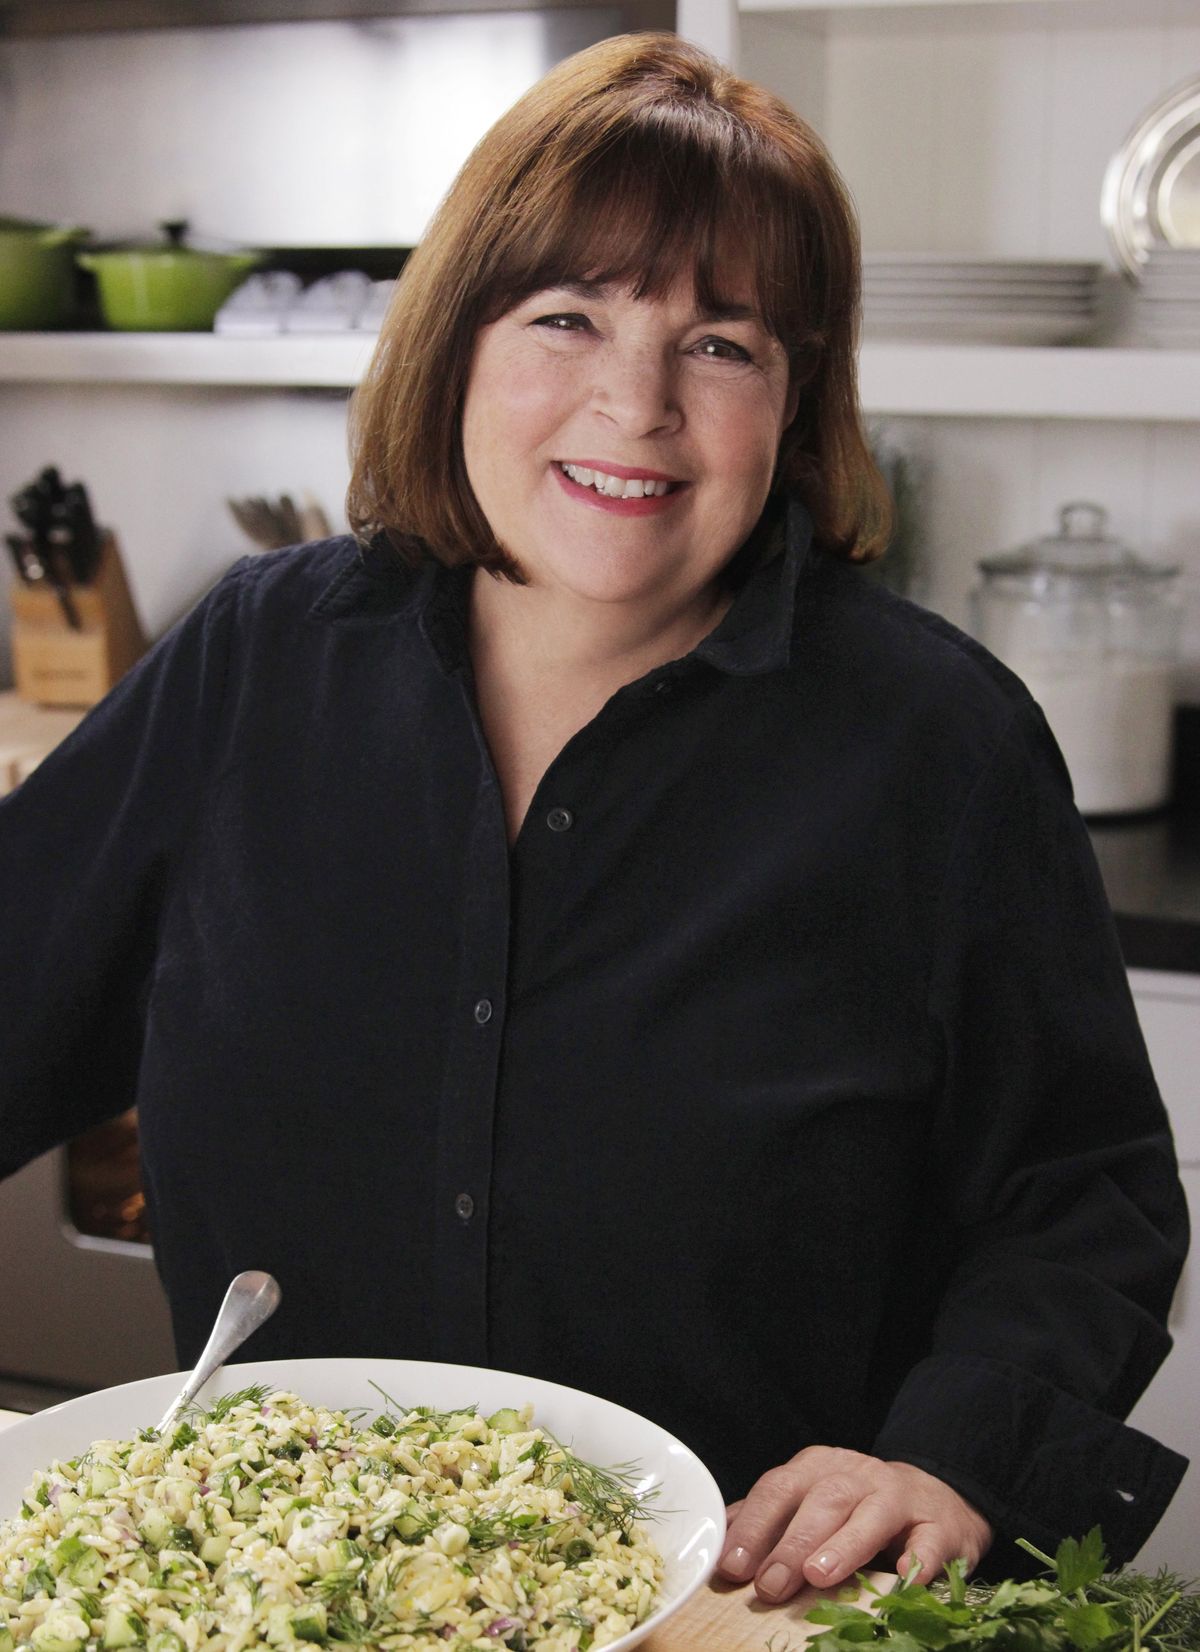 ‘Barefoot Contessa: Cook Like A Pro’ on Food Network Oct. 27 | Next TV